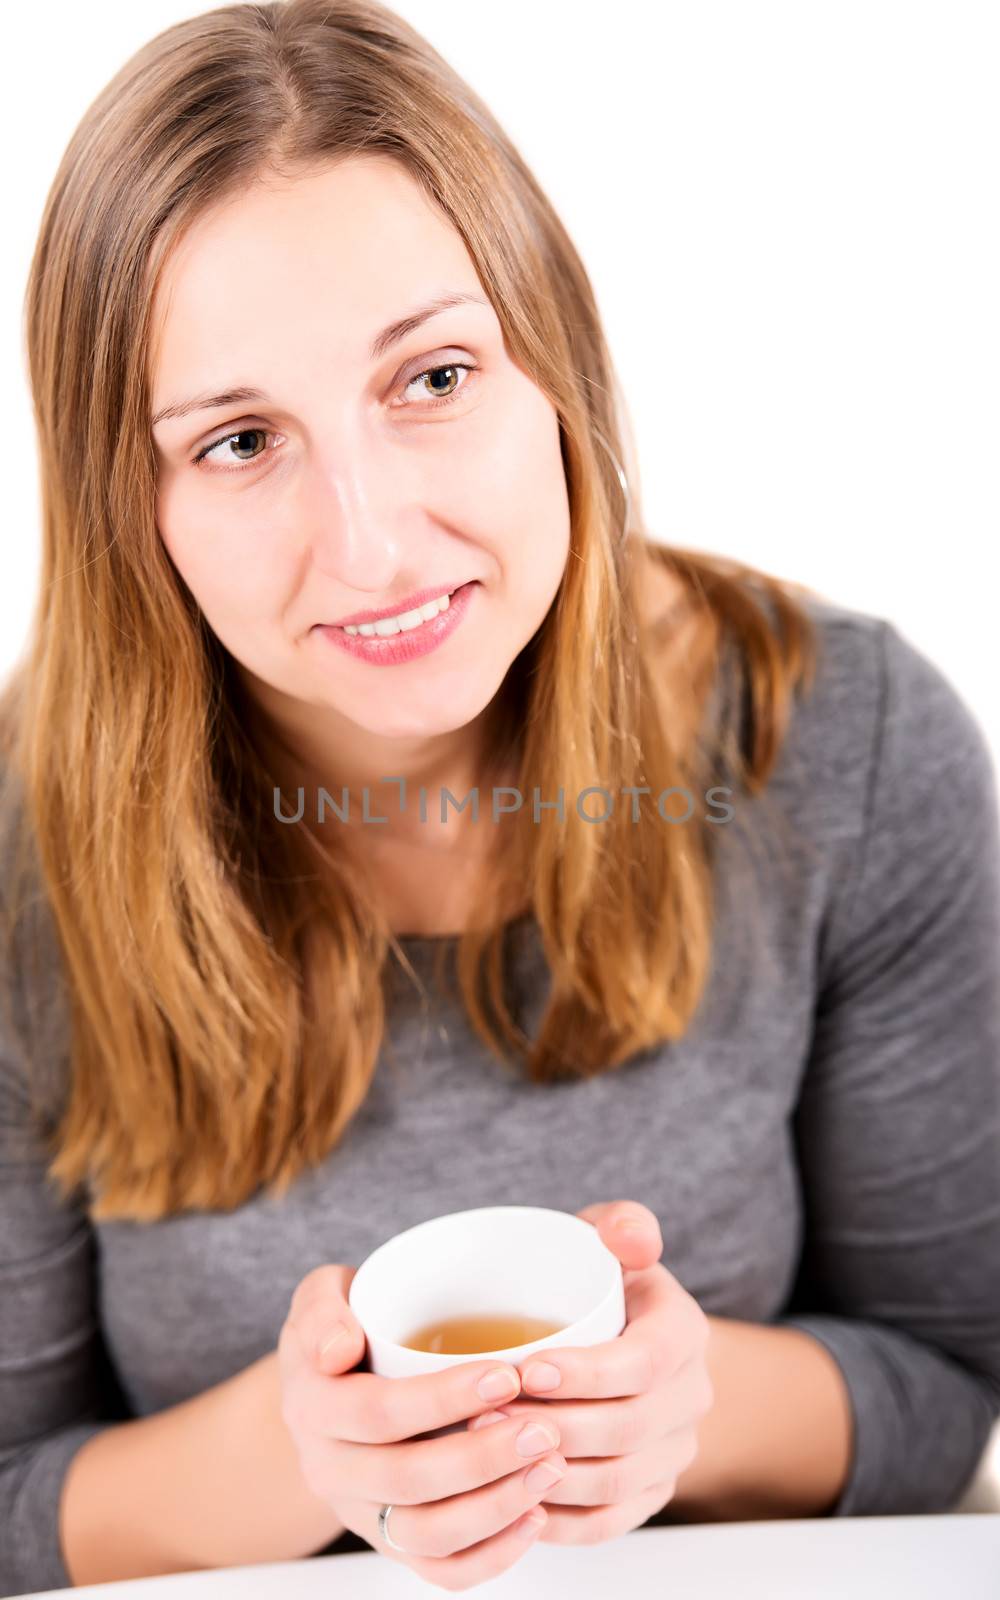 Happy girl in grey holding mug and not looking at camera with smile